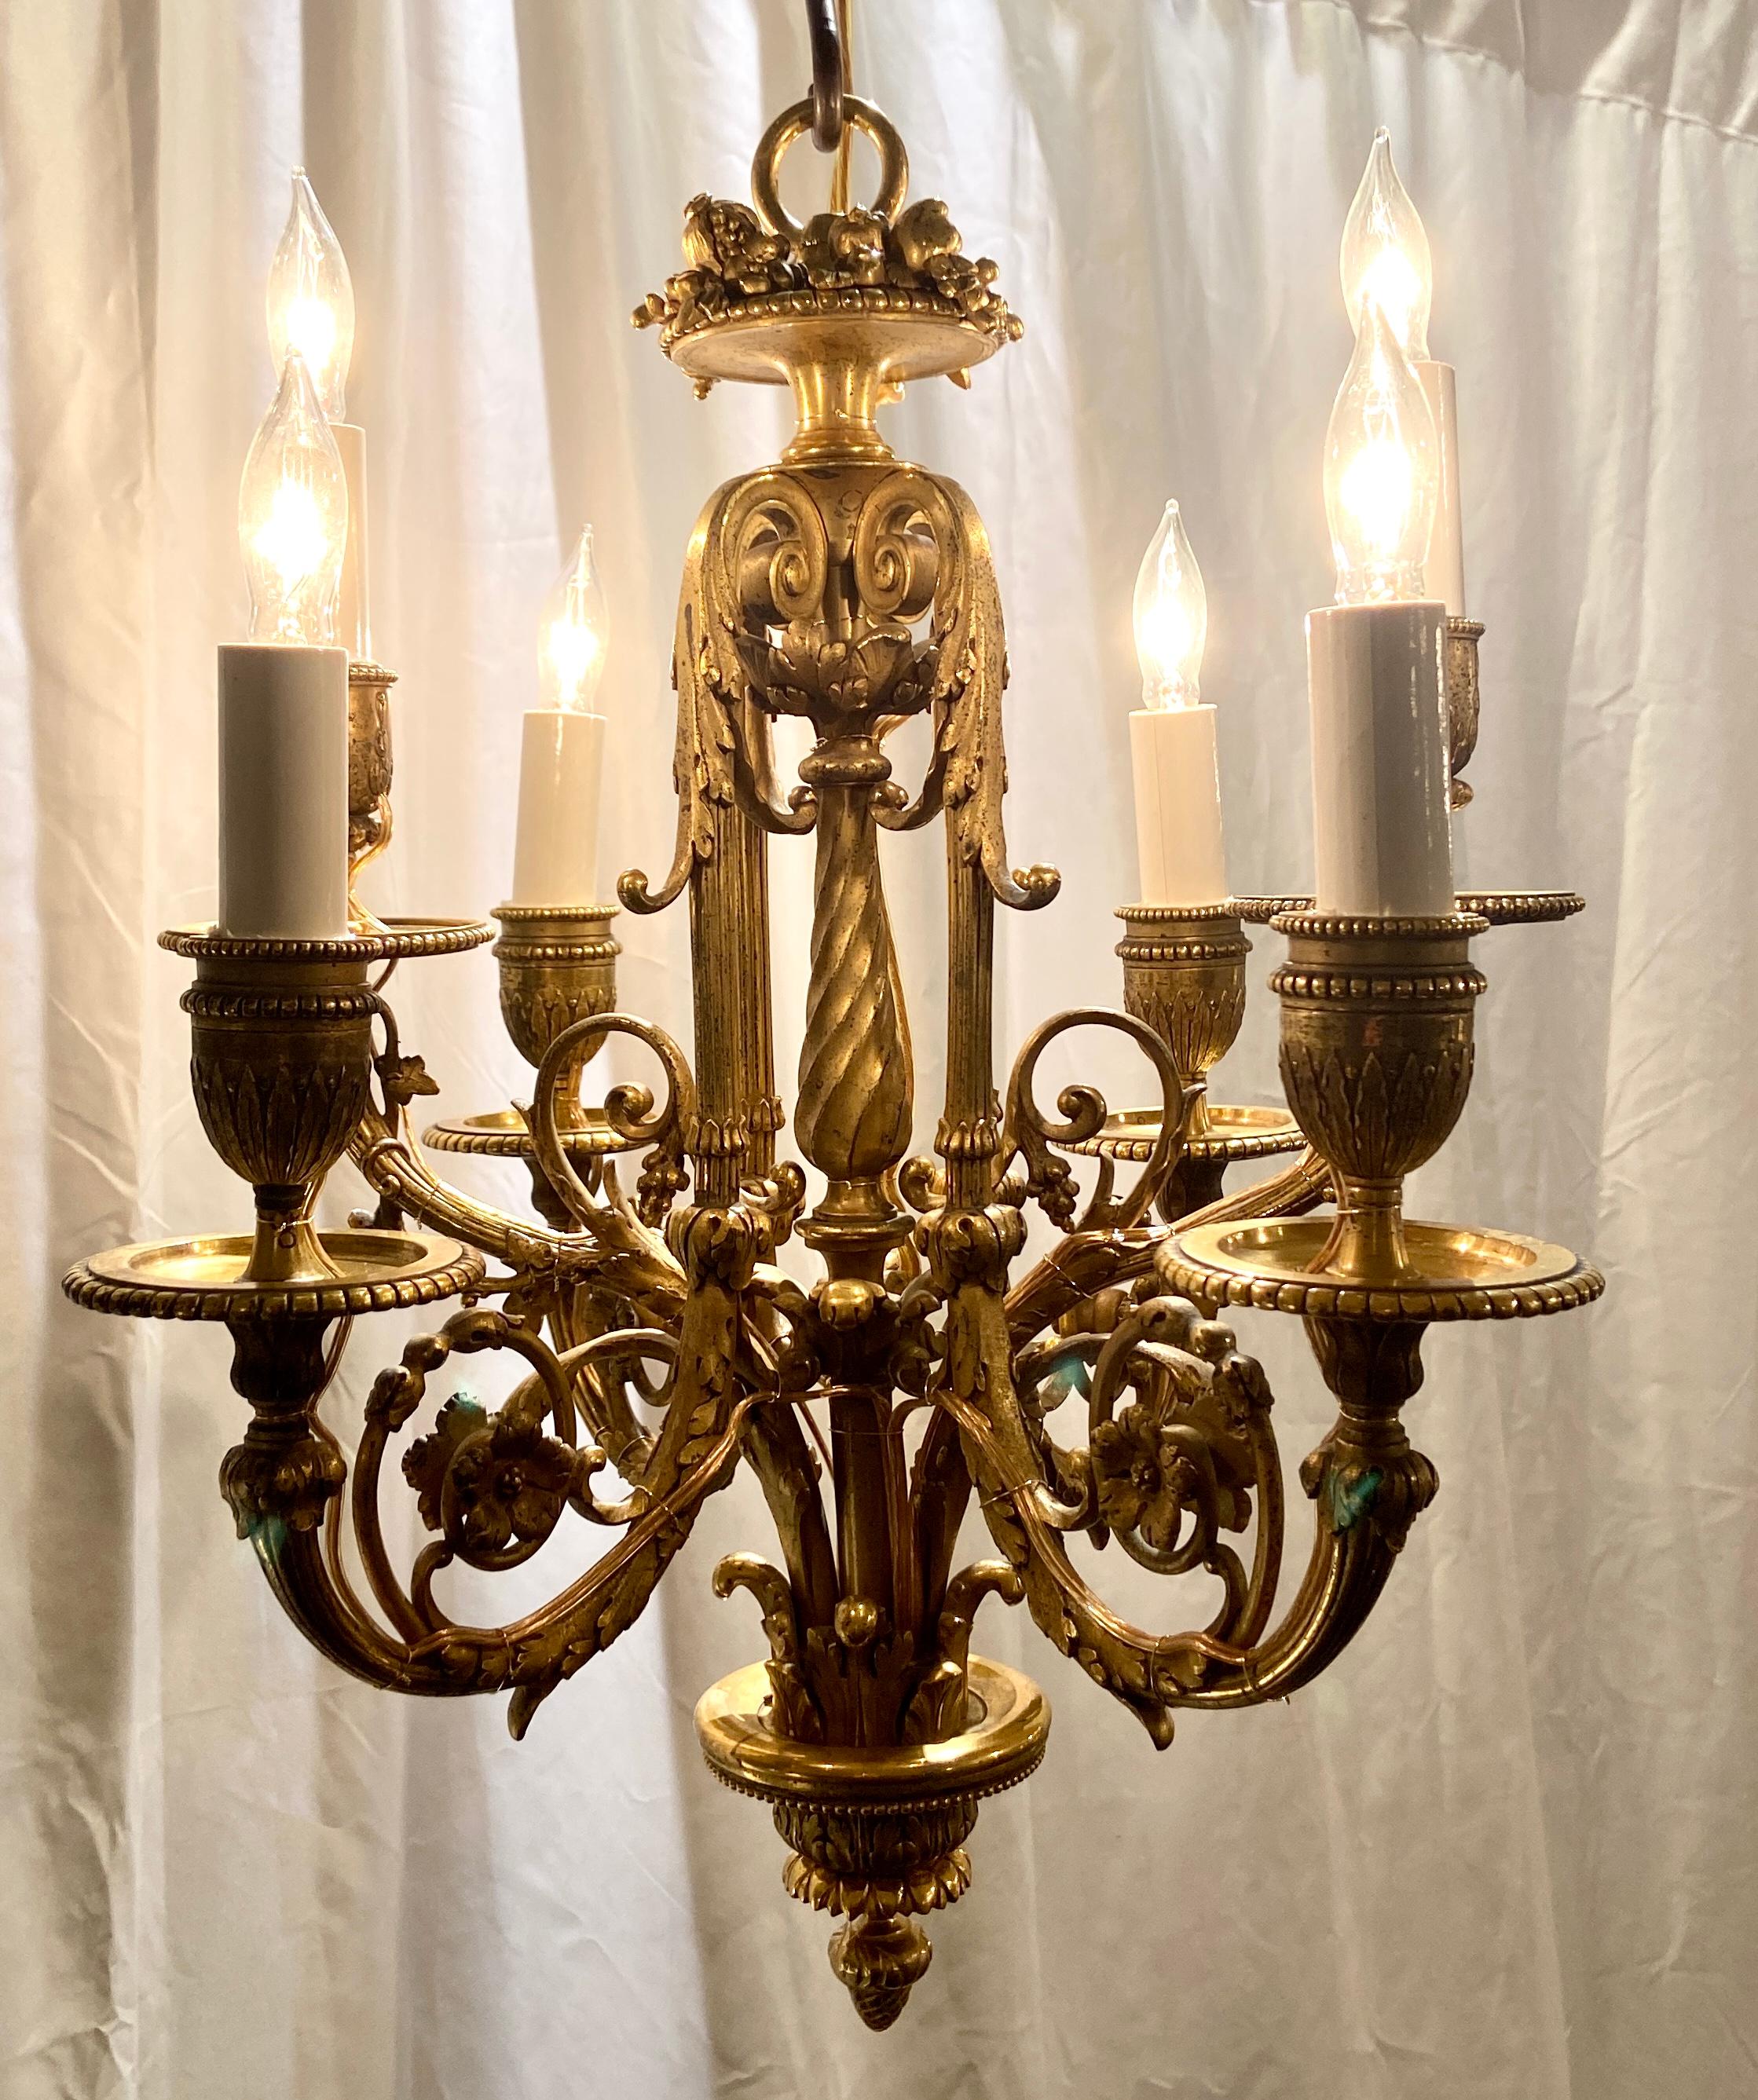 Small antique 19th century French Louis XVI exquisite quality ormolu 6 light chandelier.